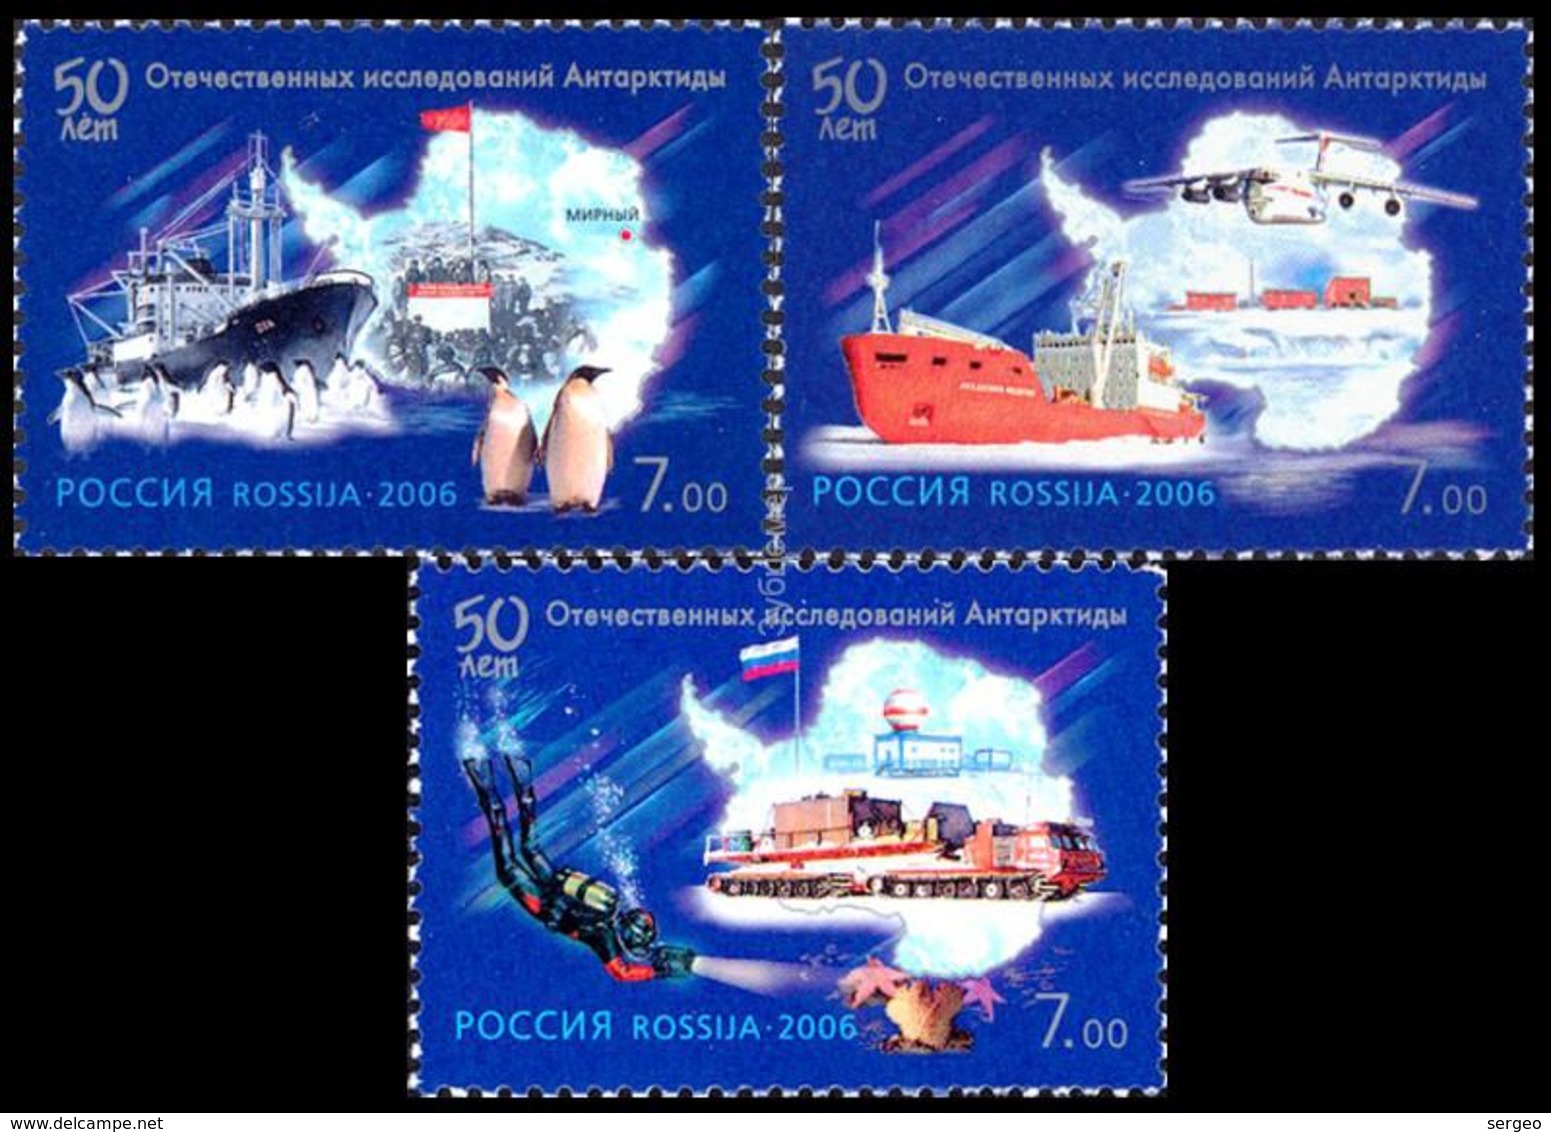 Russia 2006 The 50th Anniversary Of Antarctic's Research.MNH - Unused Stamps